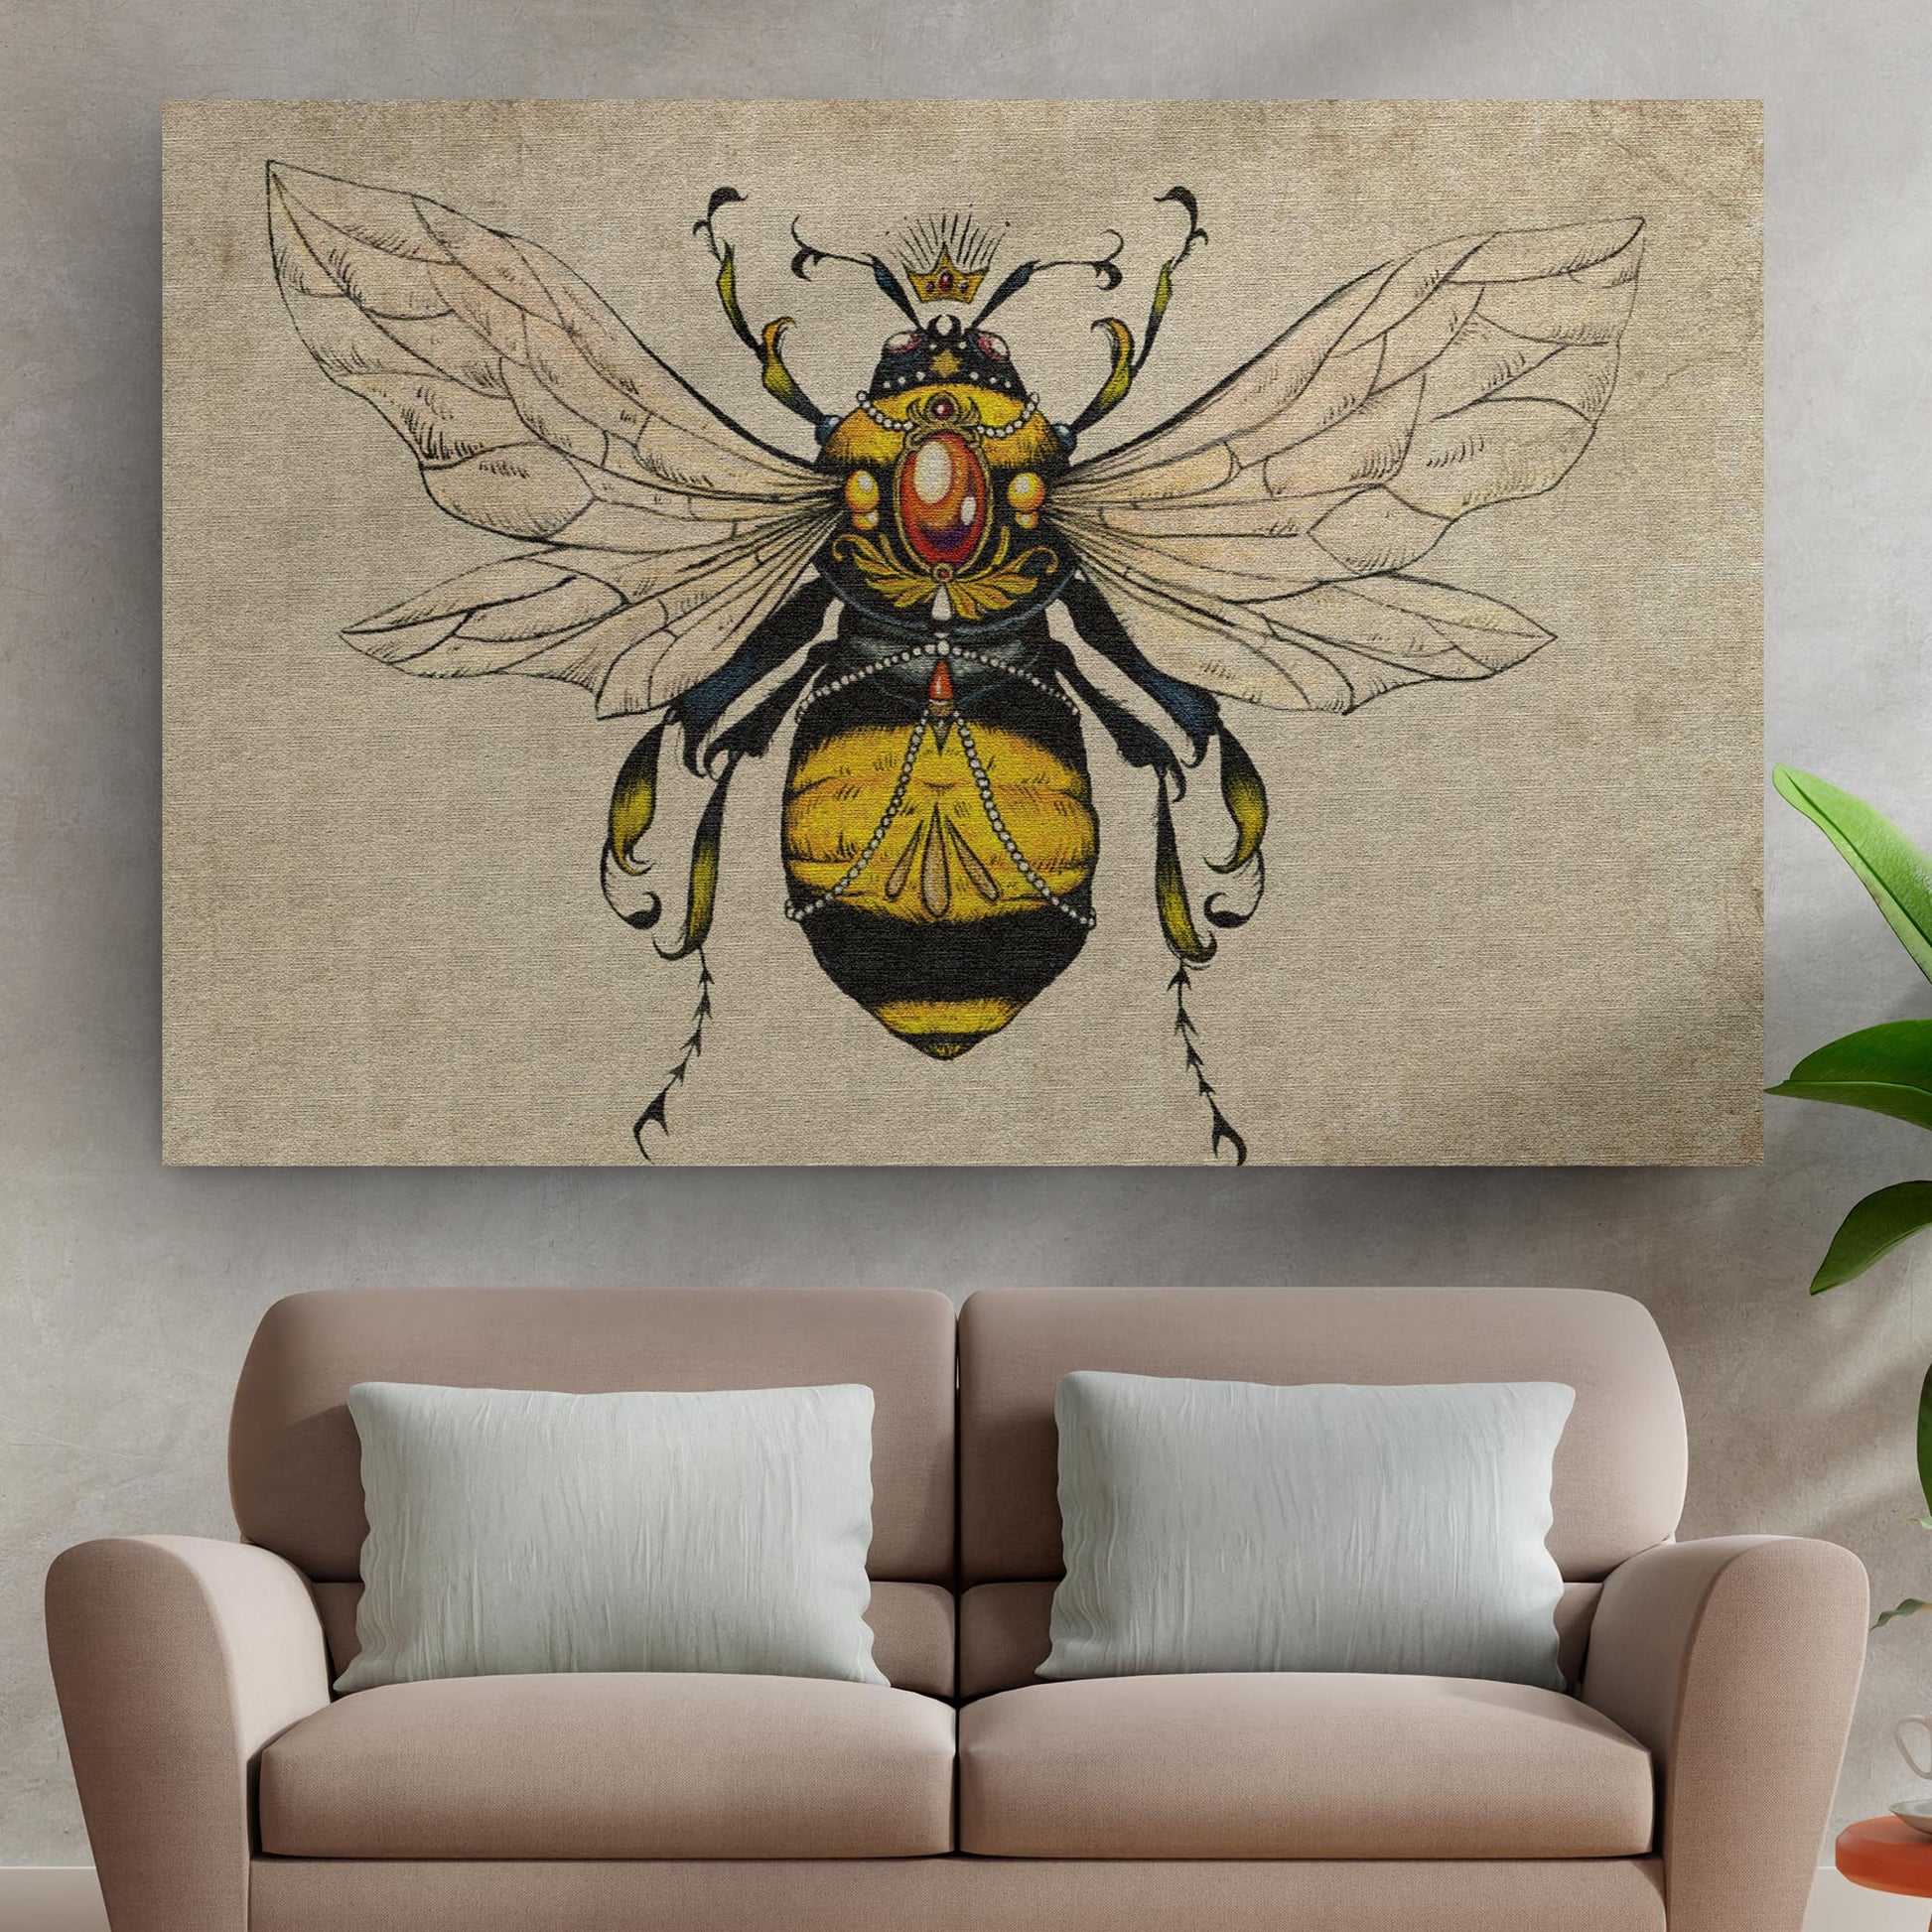 Vintage Queen Bee Canvas Wall Art Style 2 - Image by Tailored Canvases